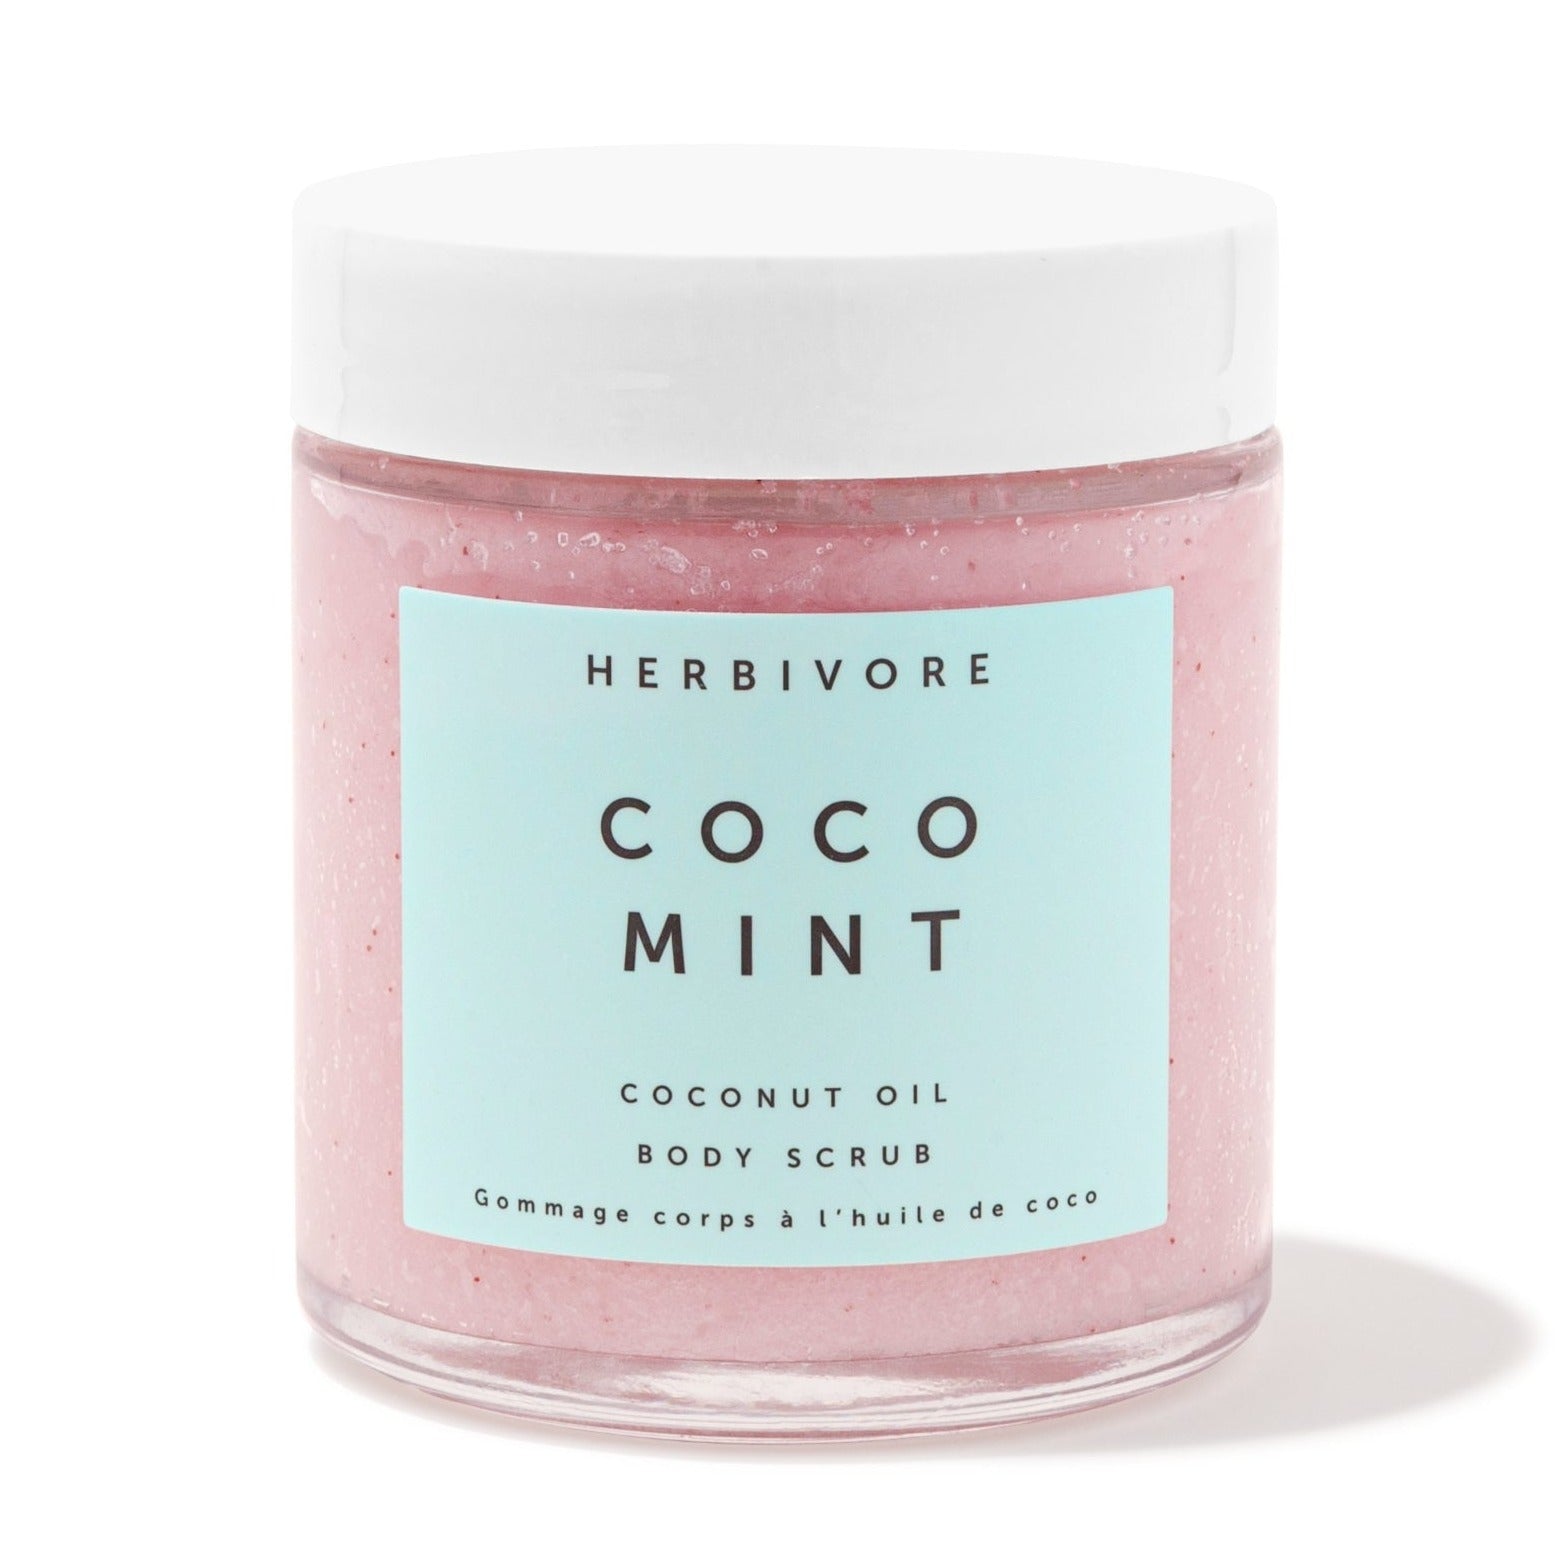 COCO Mint Body Scrub by Herbivore on White Background